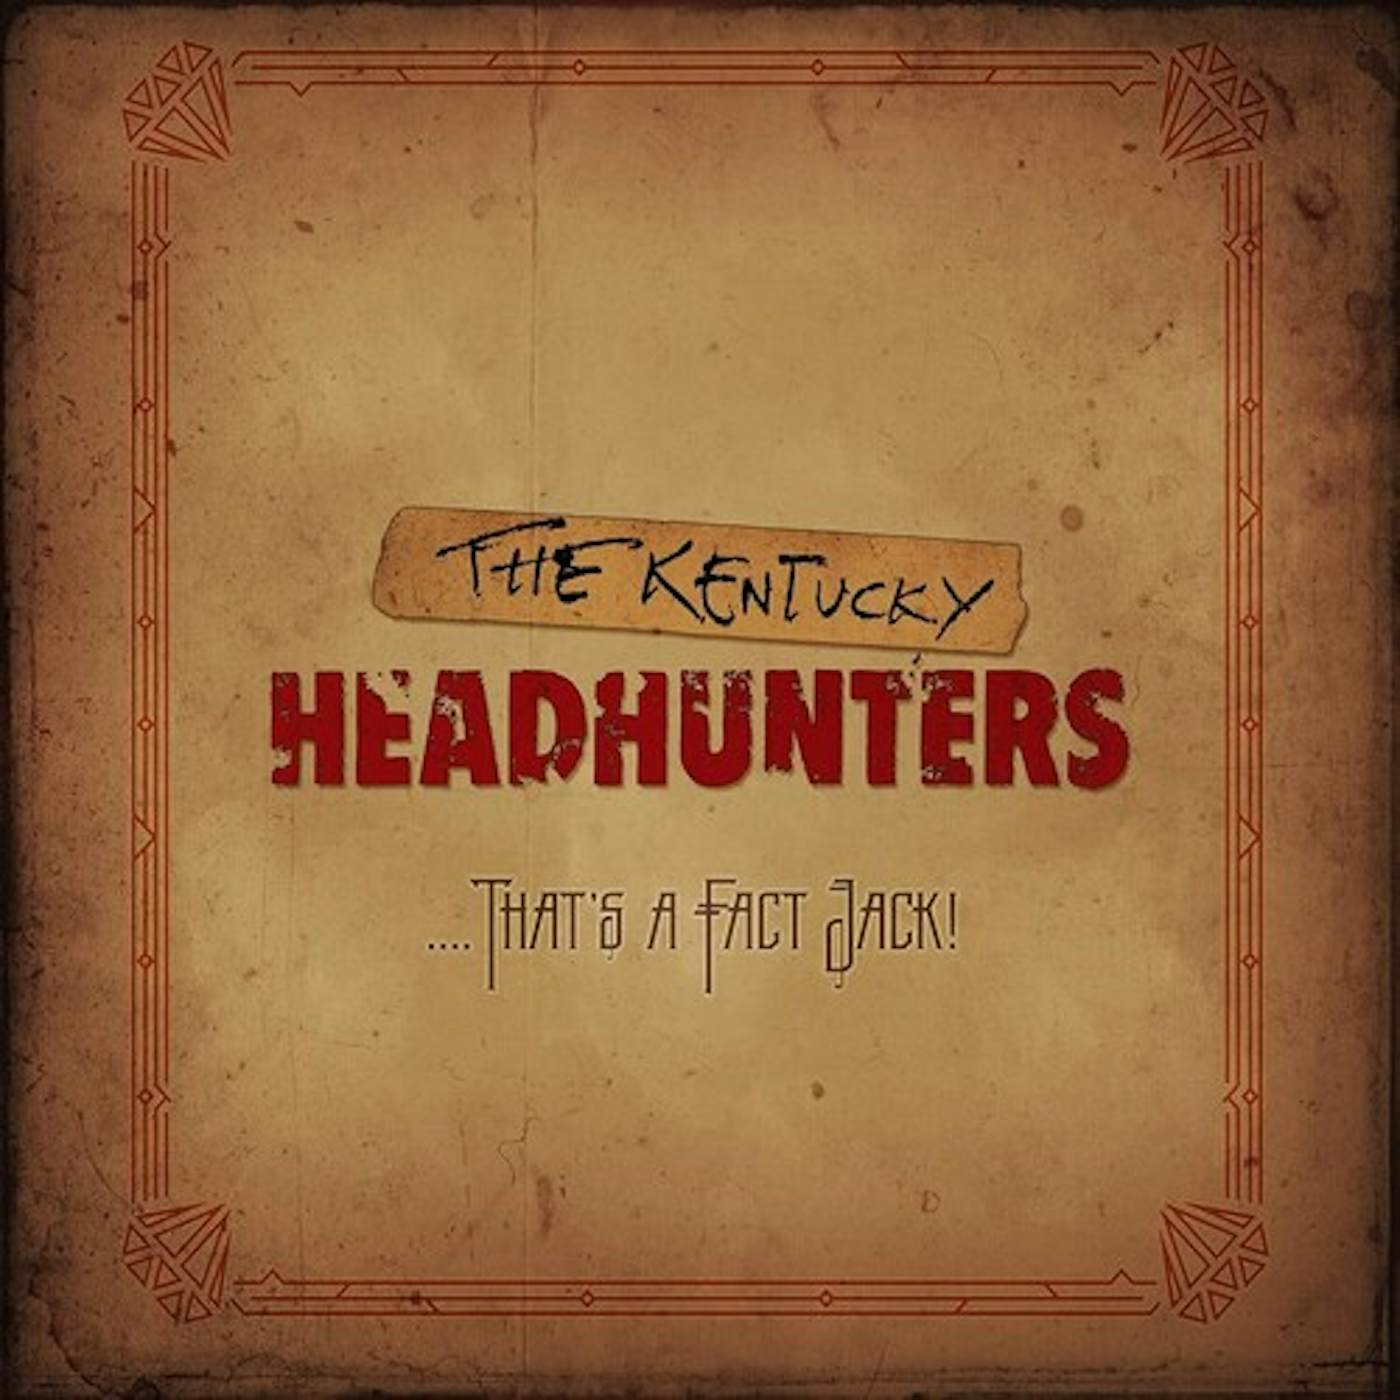 The Kentucky Headhunters ....THAT'S A FACT JACK! CD